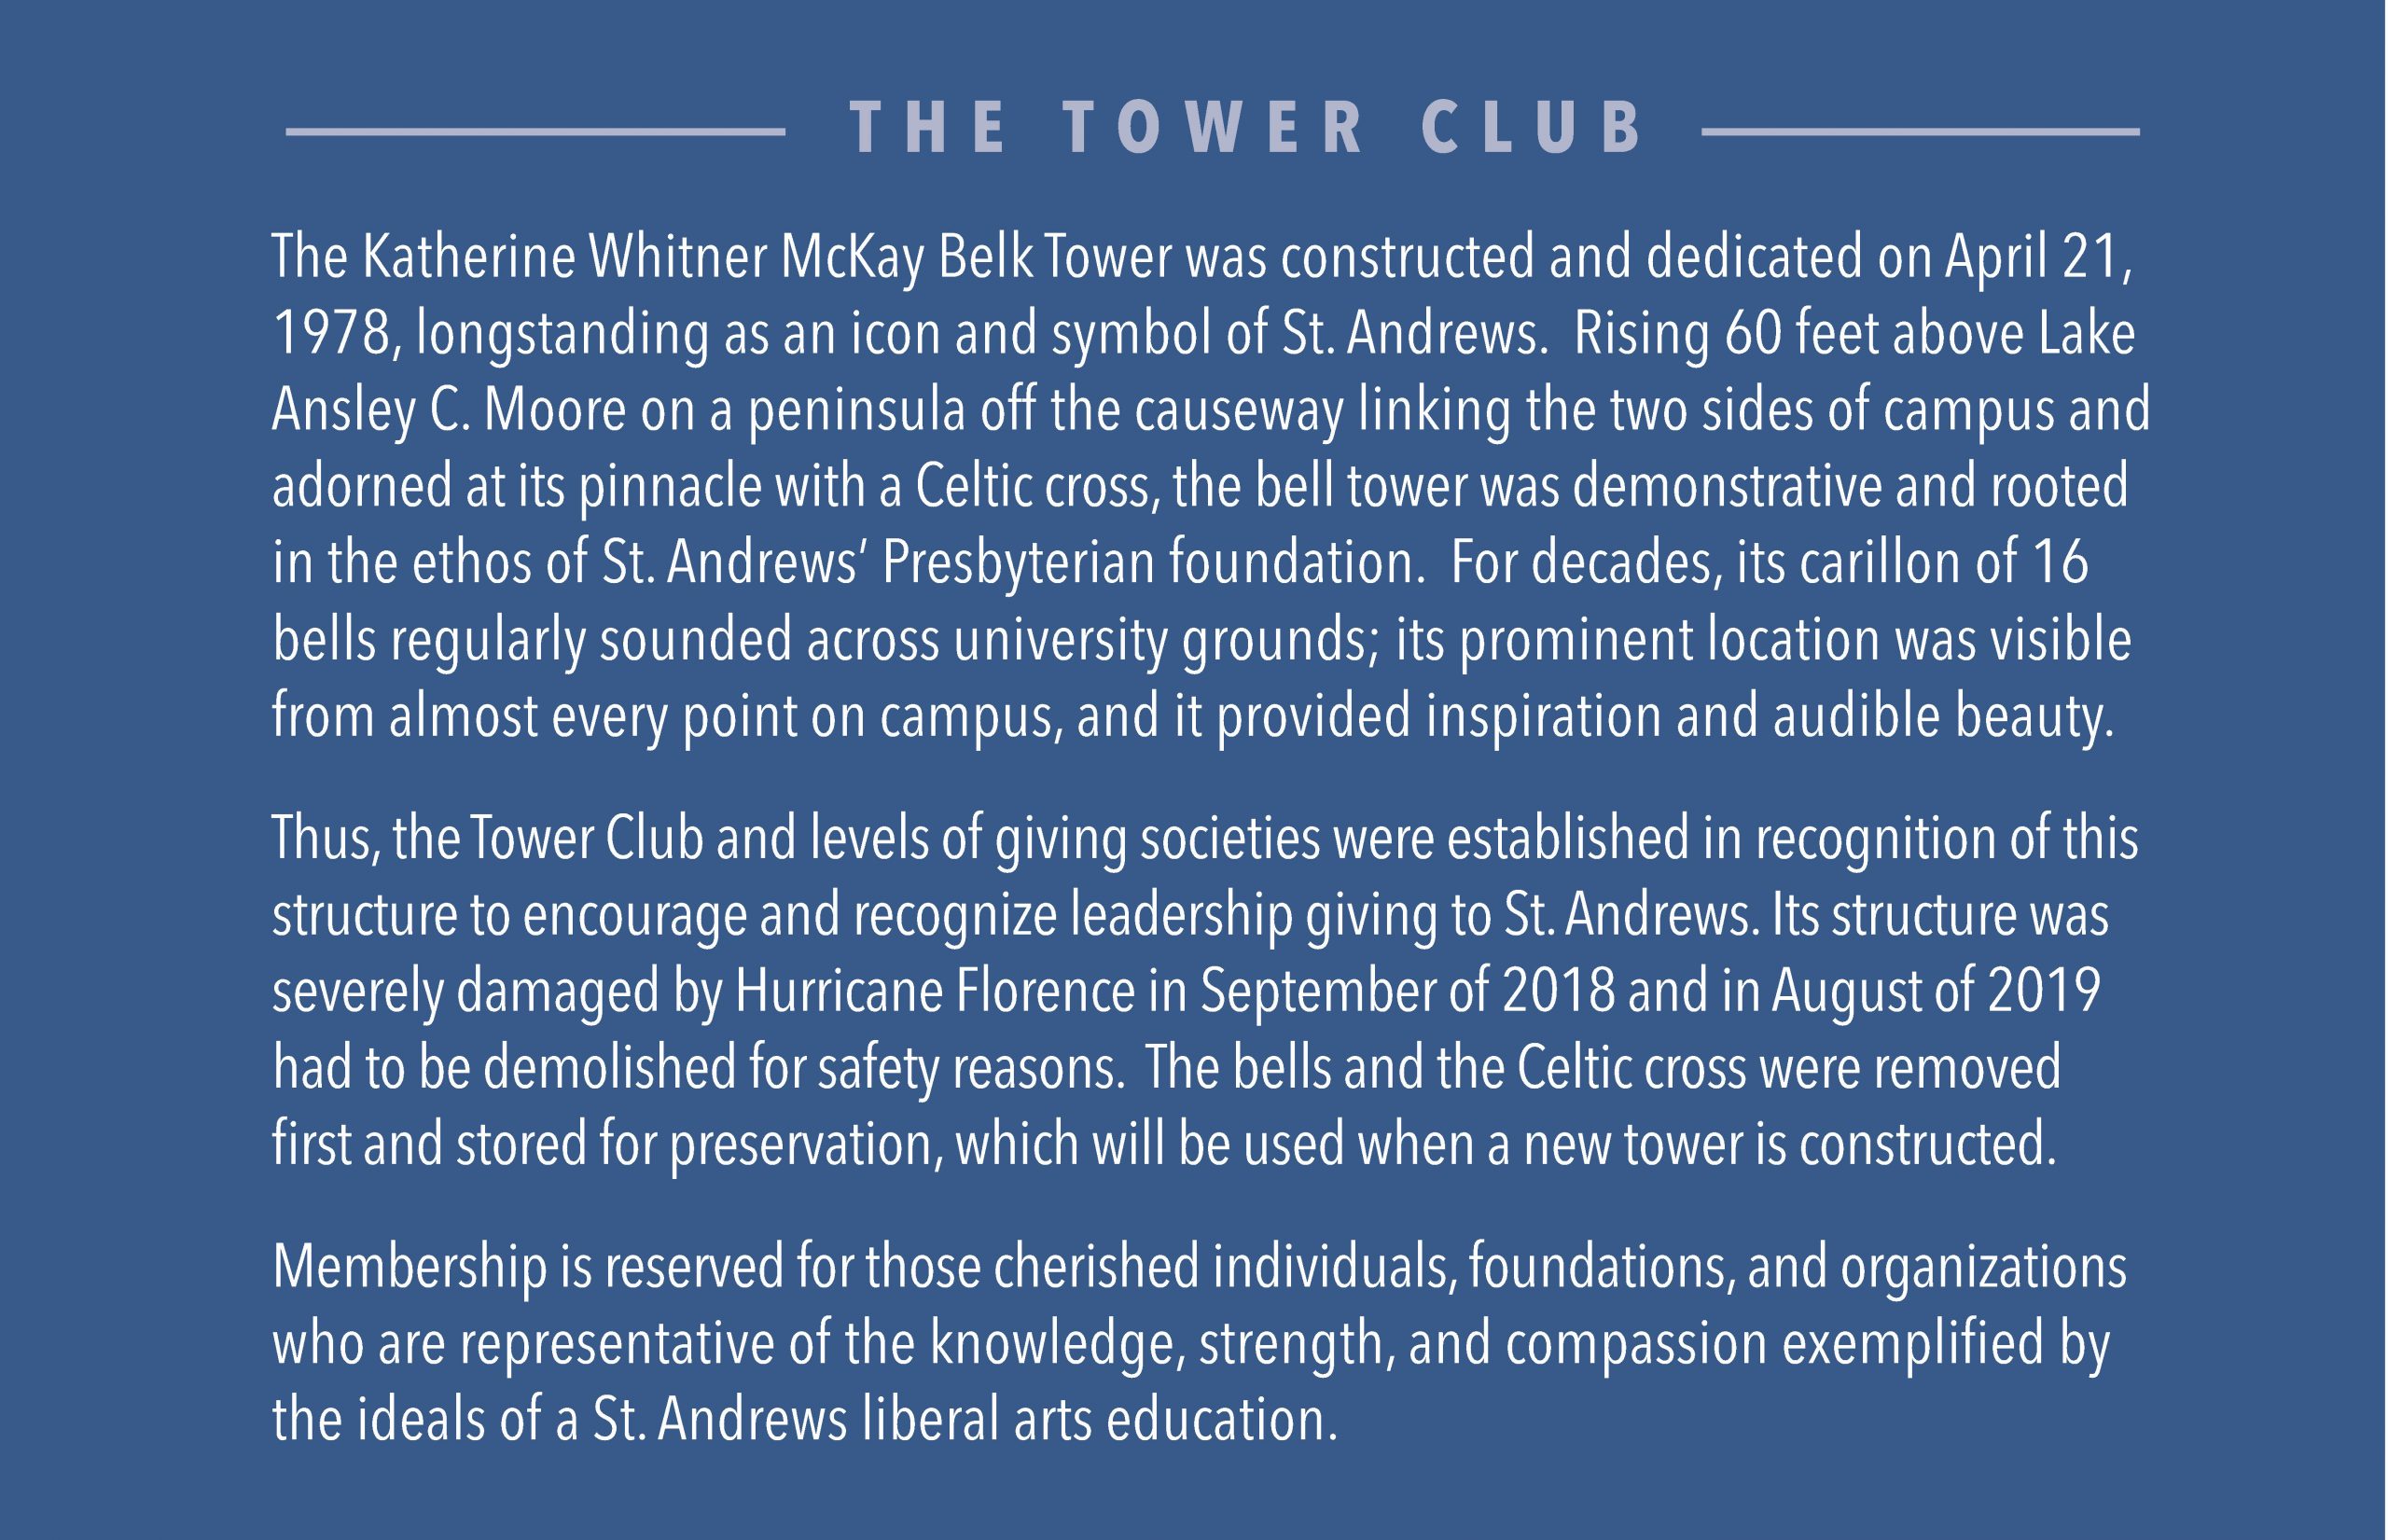 the tower club intro text